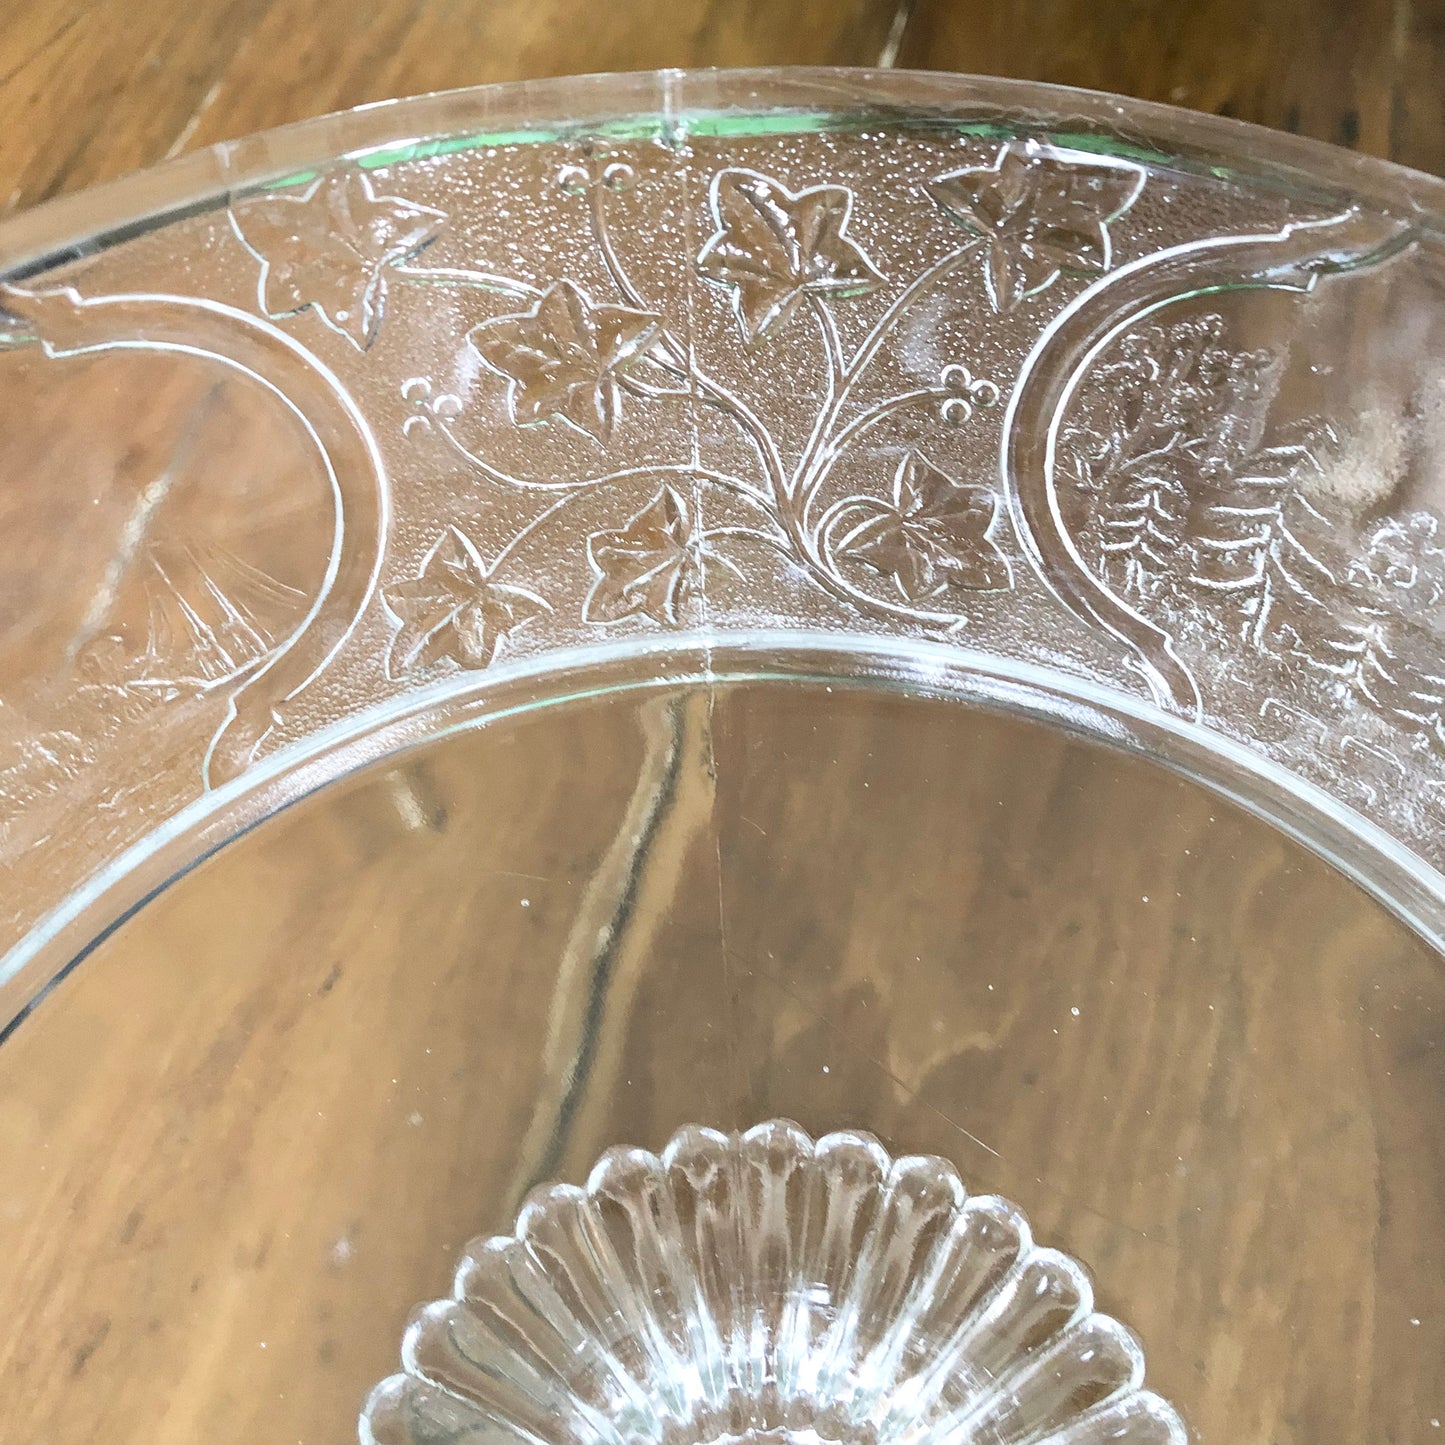 Early Pressed Glass Compote, 'Canadian'